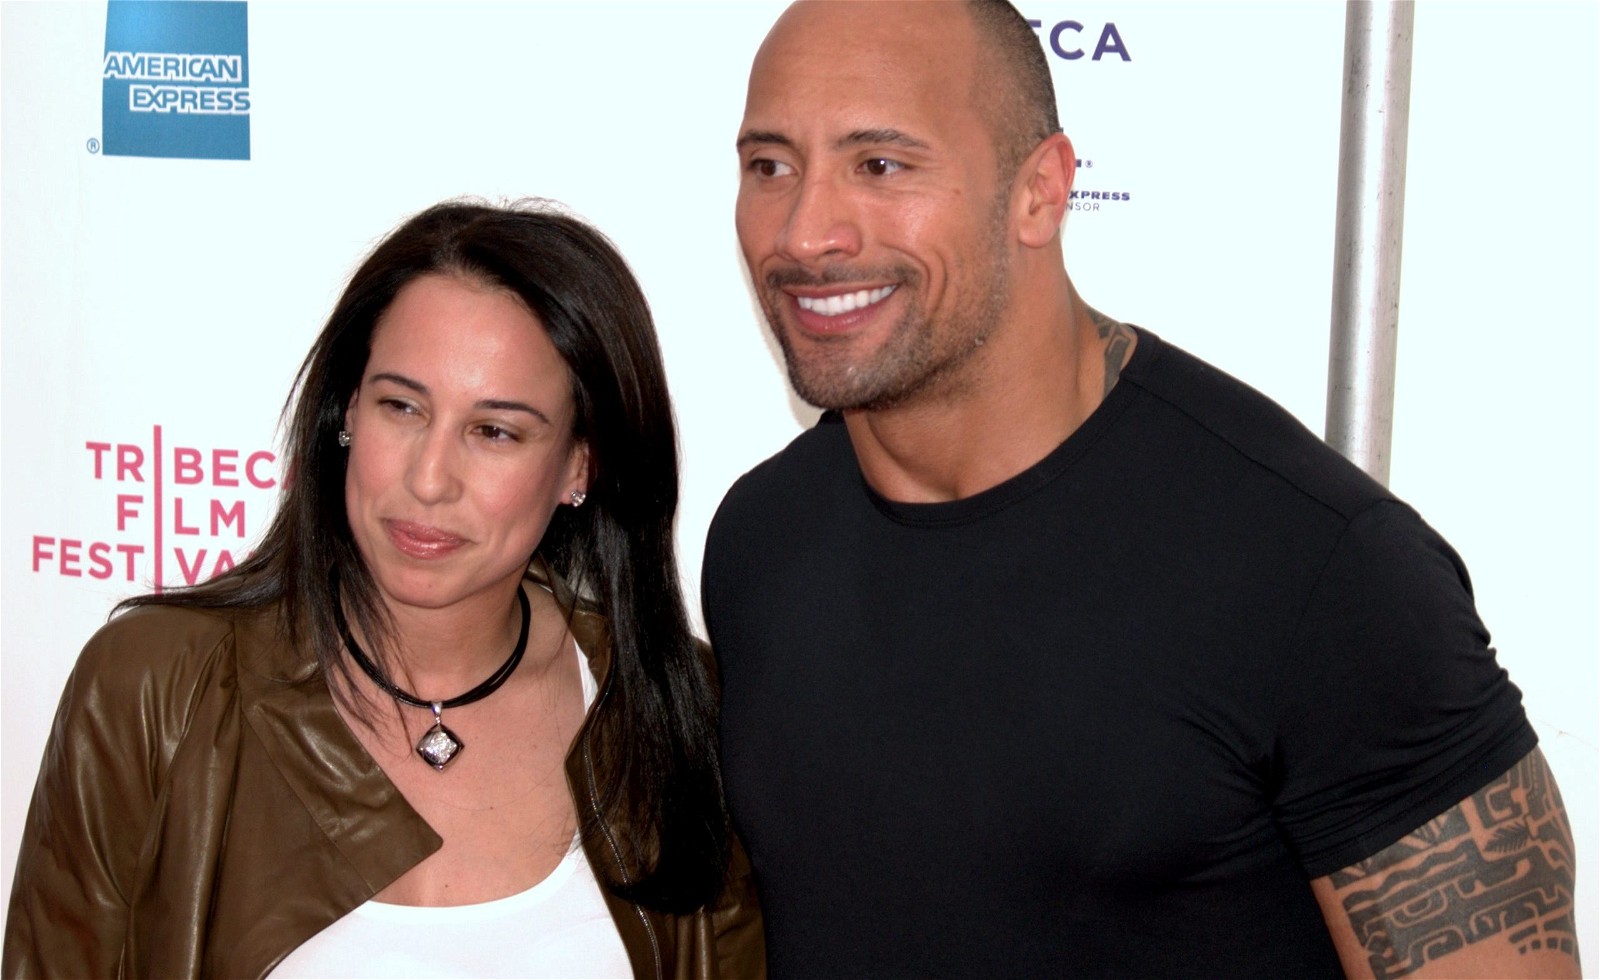 How Dany Garcia supported Dwayne Johnson